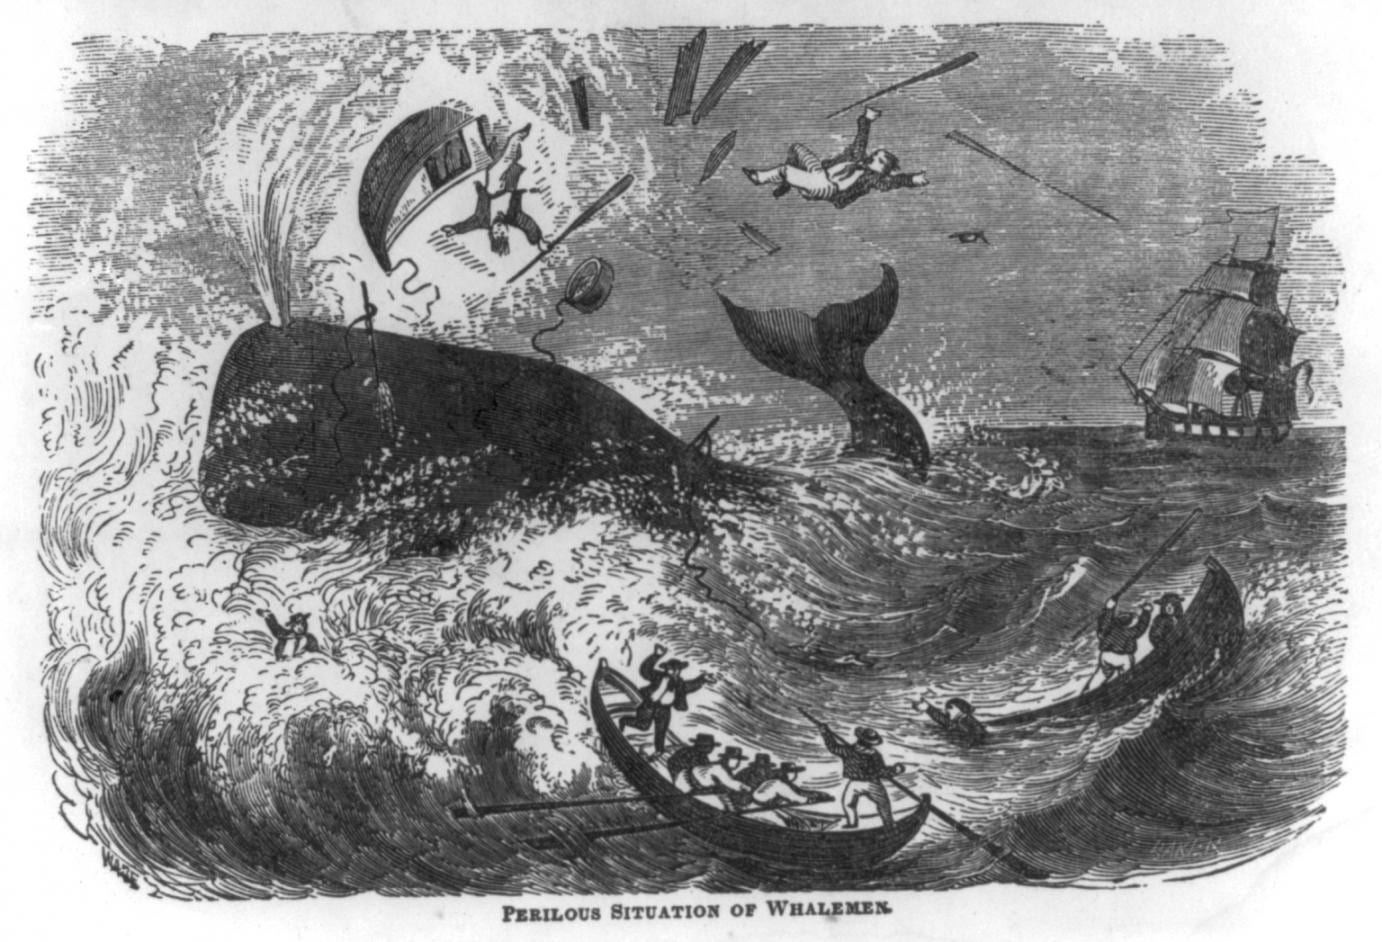 “Perilous Situation of Whalemen,” 1861.